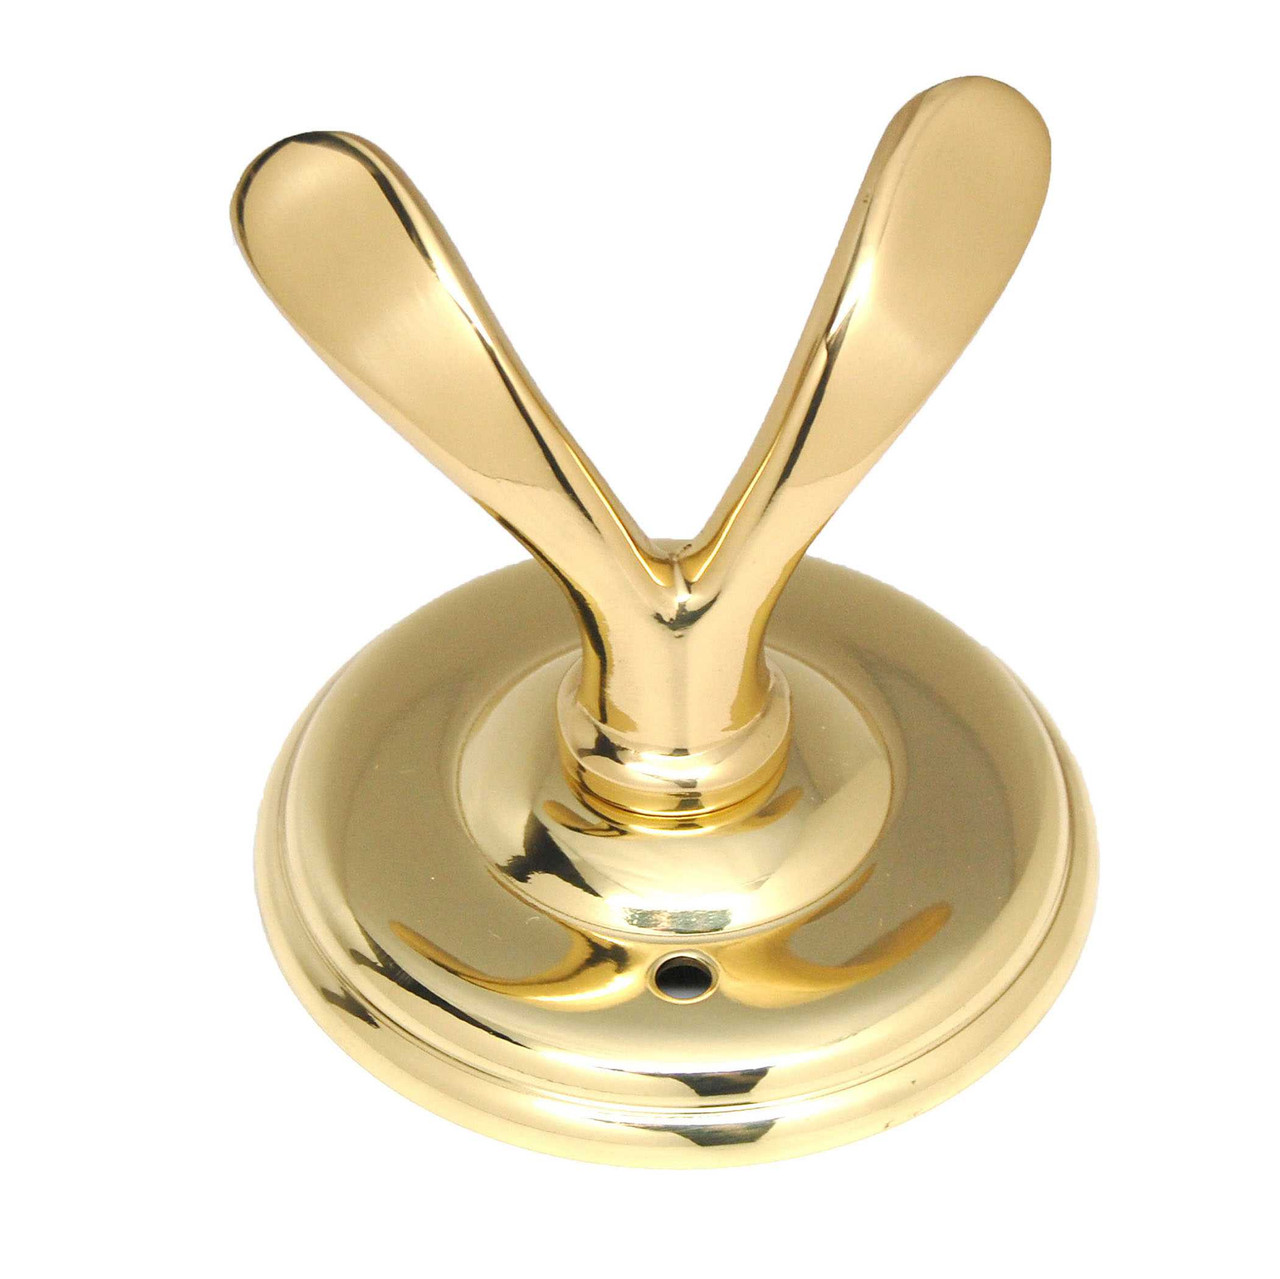 https://cdn11.bigcommerce.com/s-1xpphv/images/stencil/1280x1280/products/119/13721/AMEROCK-Solid-Brass-Bathroom-Robe-Hook-Polished-Brass_4362__89324.1674492388.jpg?c=2